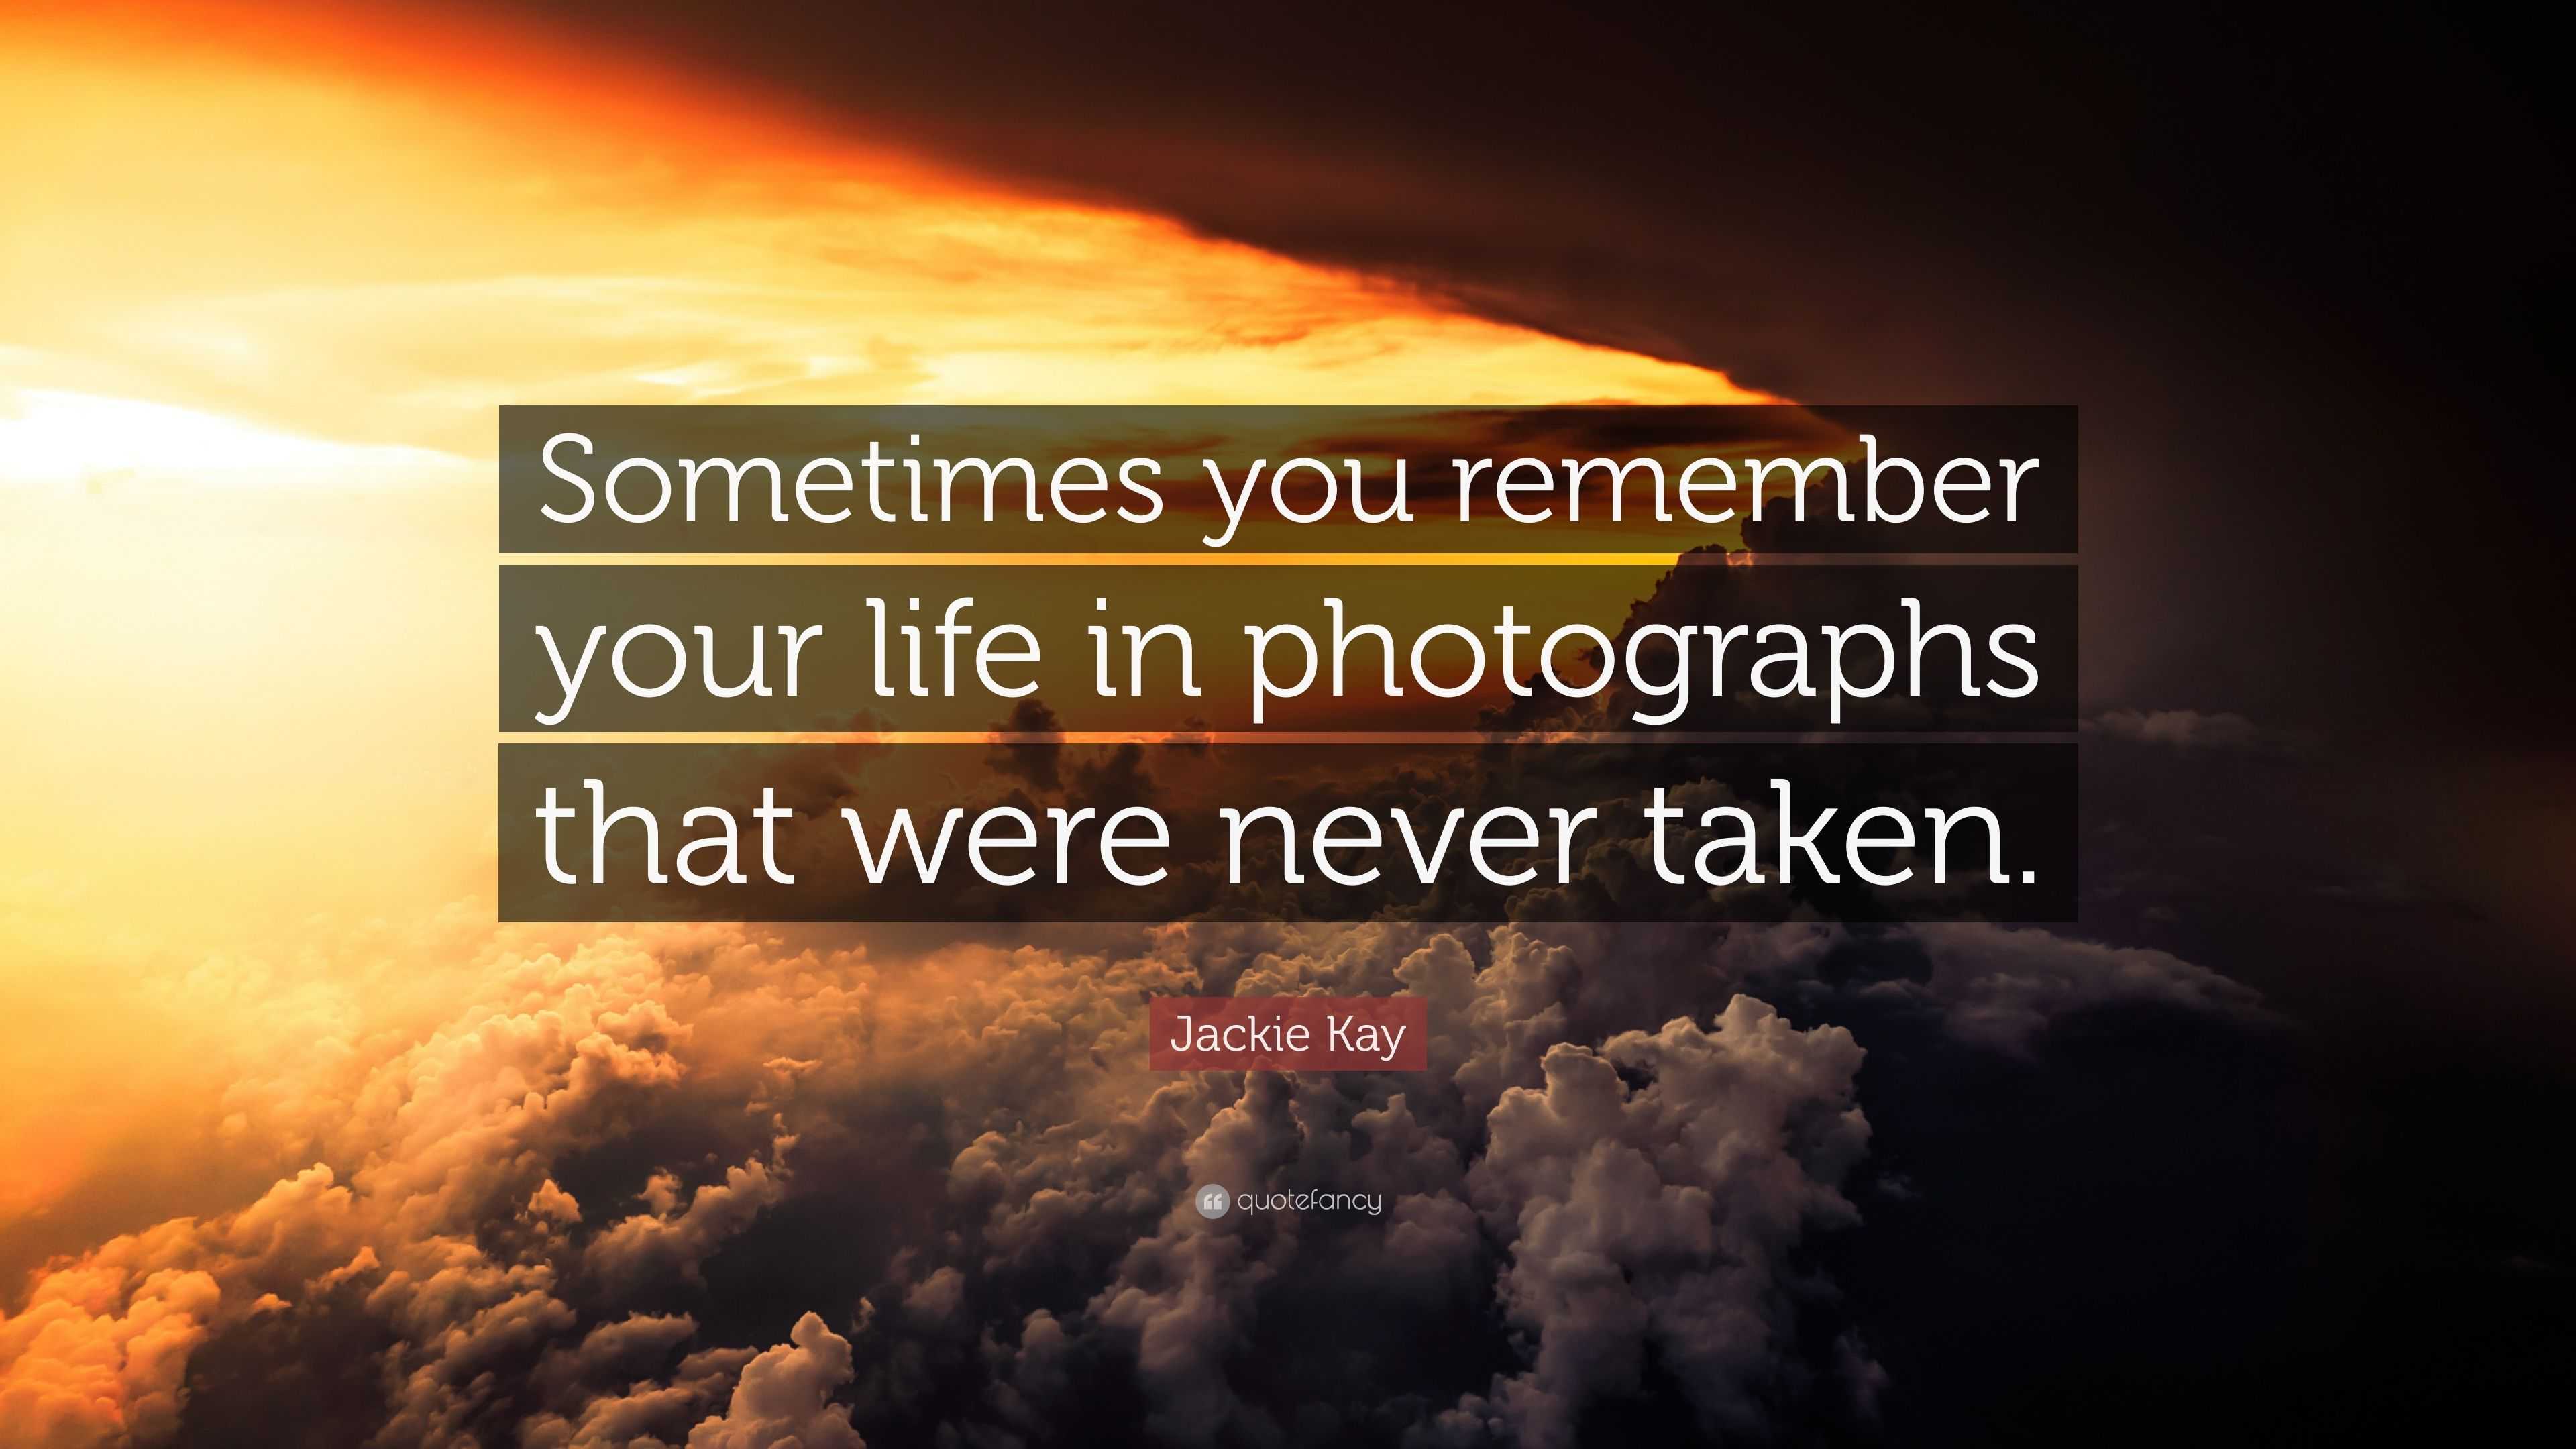 Jackie Kay Quote: “Sometimes you remember your life in photographs that ...